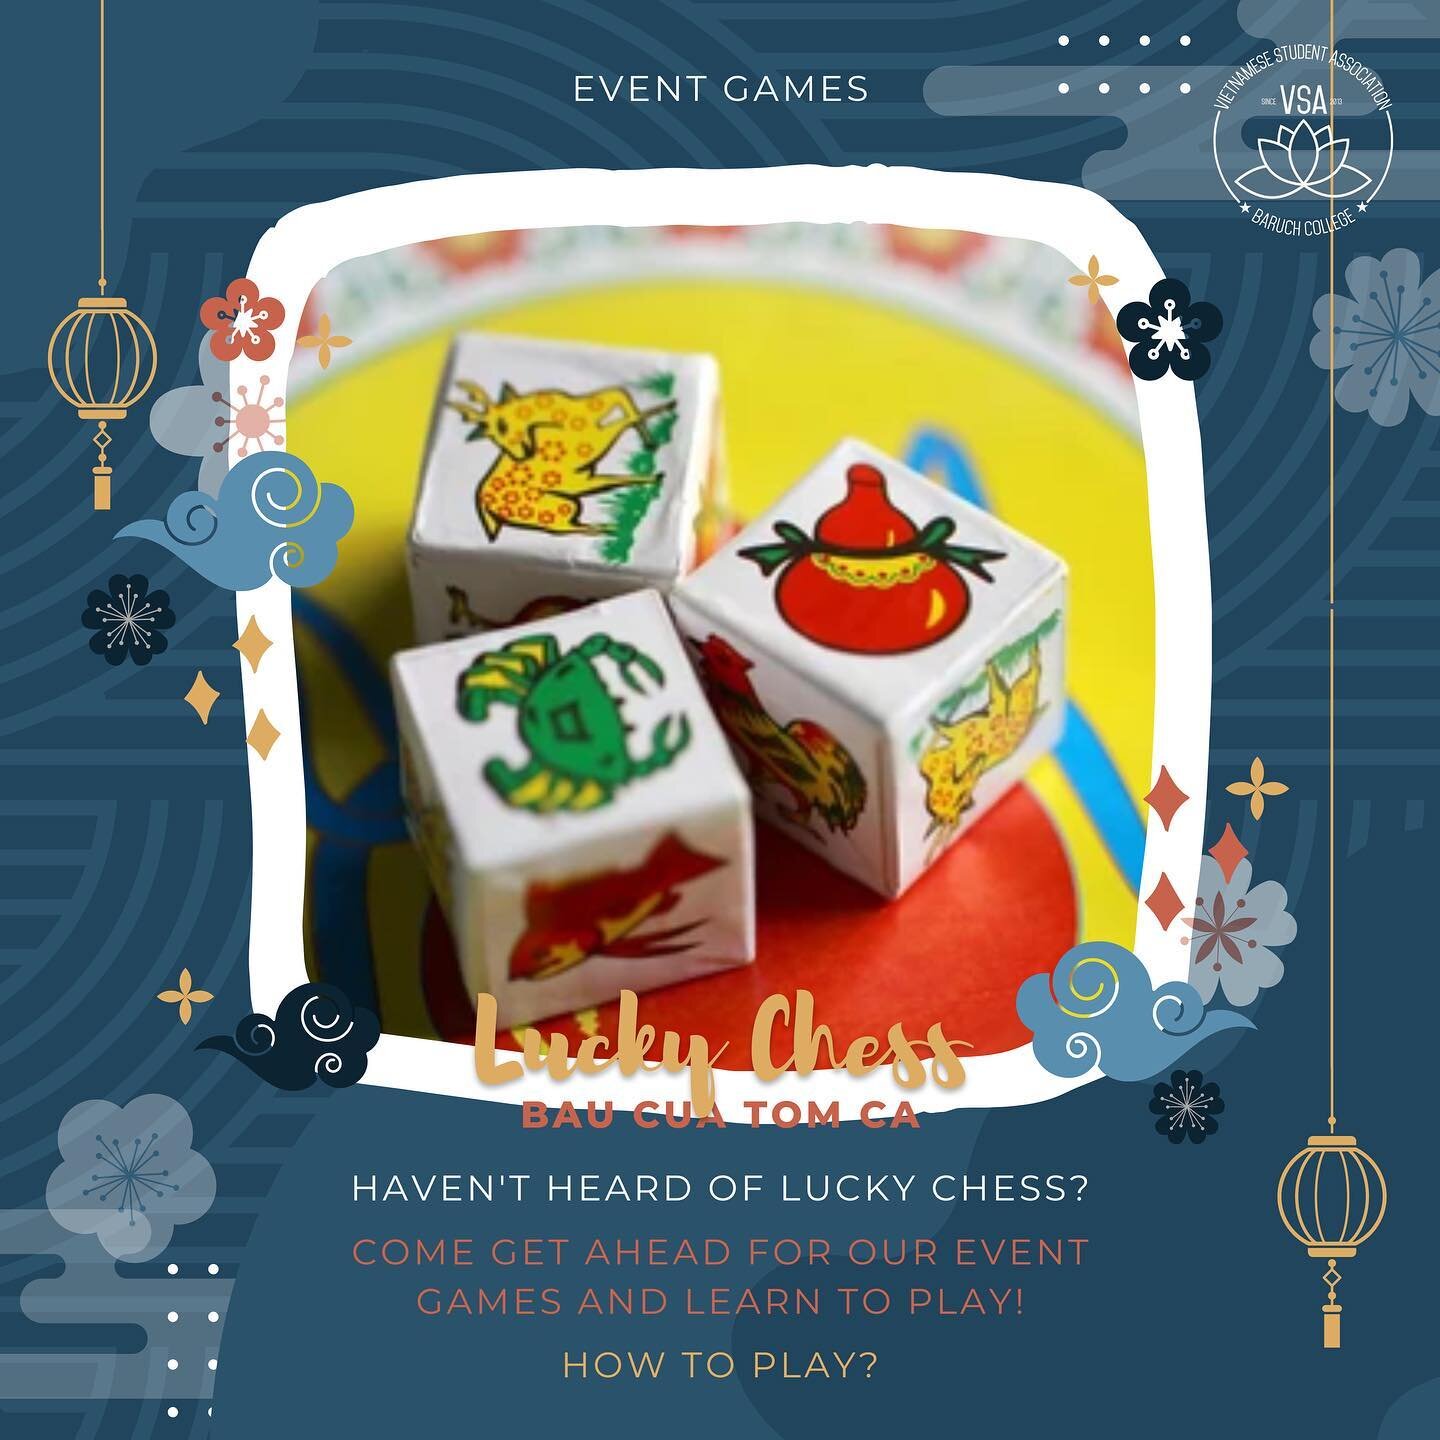 Looking to get ahead of the game for our event? Well learn to play Lucky Chess! 🦀

Some of you may have already learned the way of the dice at our events this semester, but if you haven&rsquo;t we&rsquo;ve got your back~ 🤩 While it&rsquo;s all base